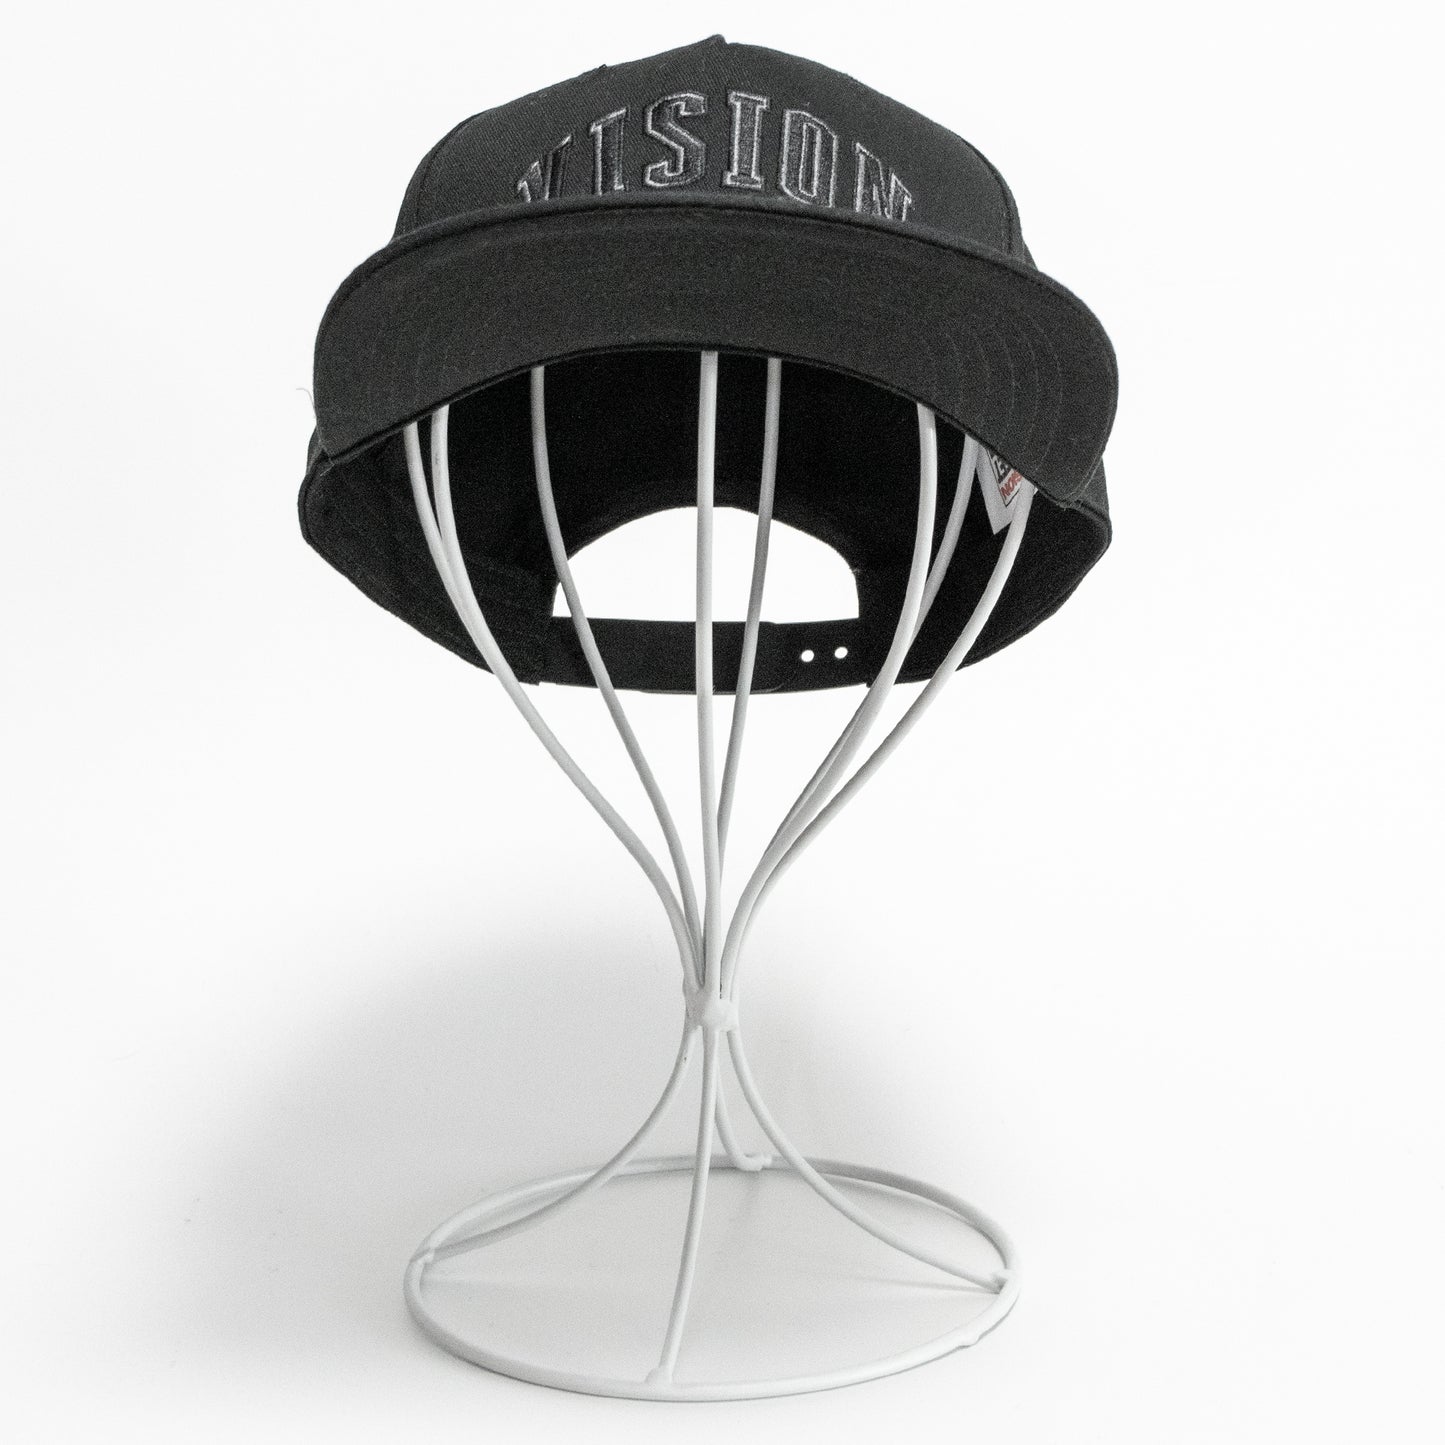 VISION STREET WEAR Logo Embroidery Baseball Cap - YOUAREMYPOISON